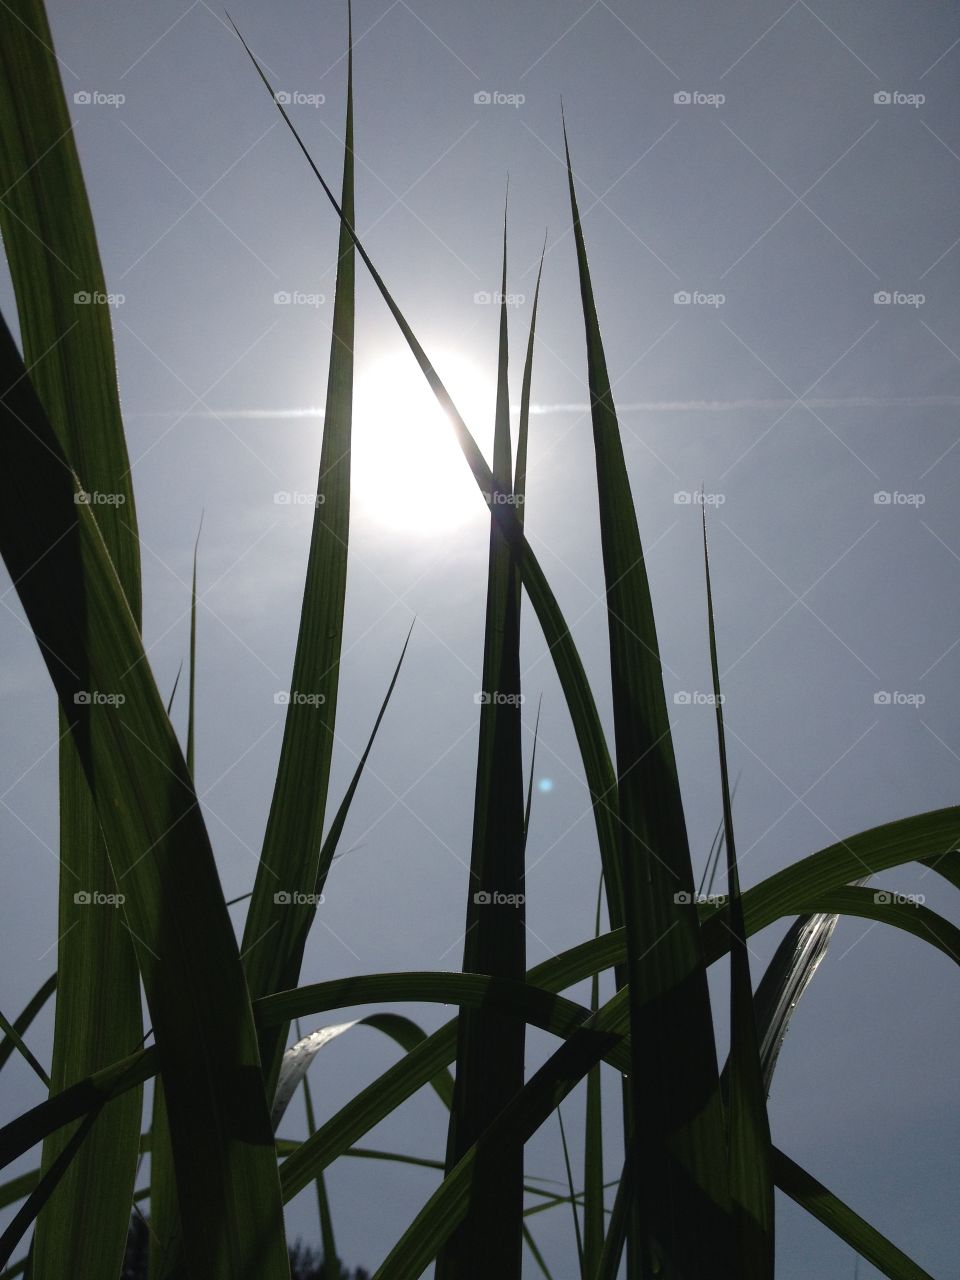 Grass Growing After Rain Showing Sun With Contrail Through It